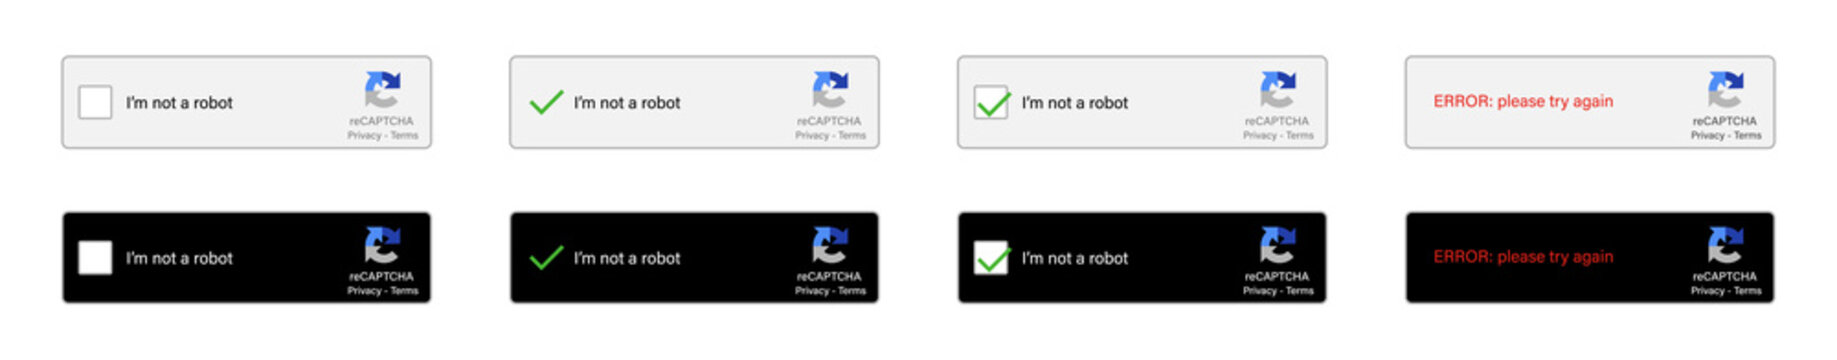 Captcha. Robot recaptcha code. Im not robot captcha with buttons for password. Turing test icons and logos. Vector. Computer random captcha test for internet and capabilities